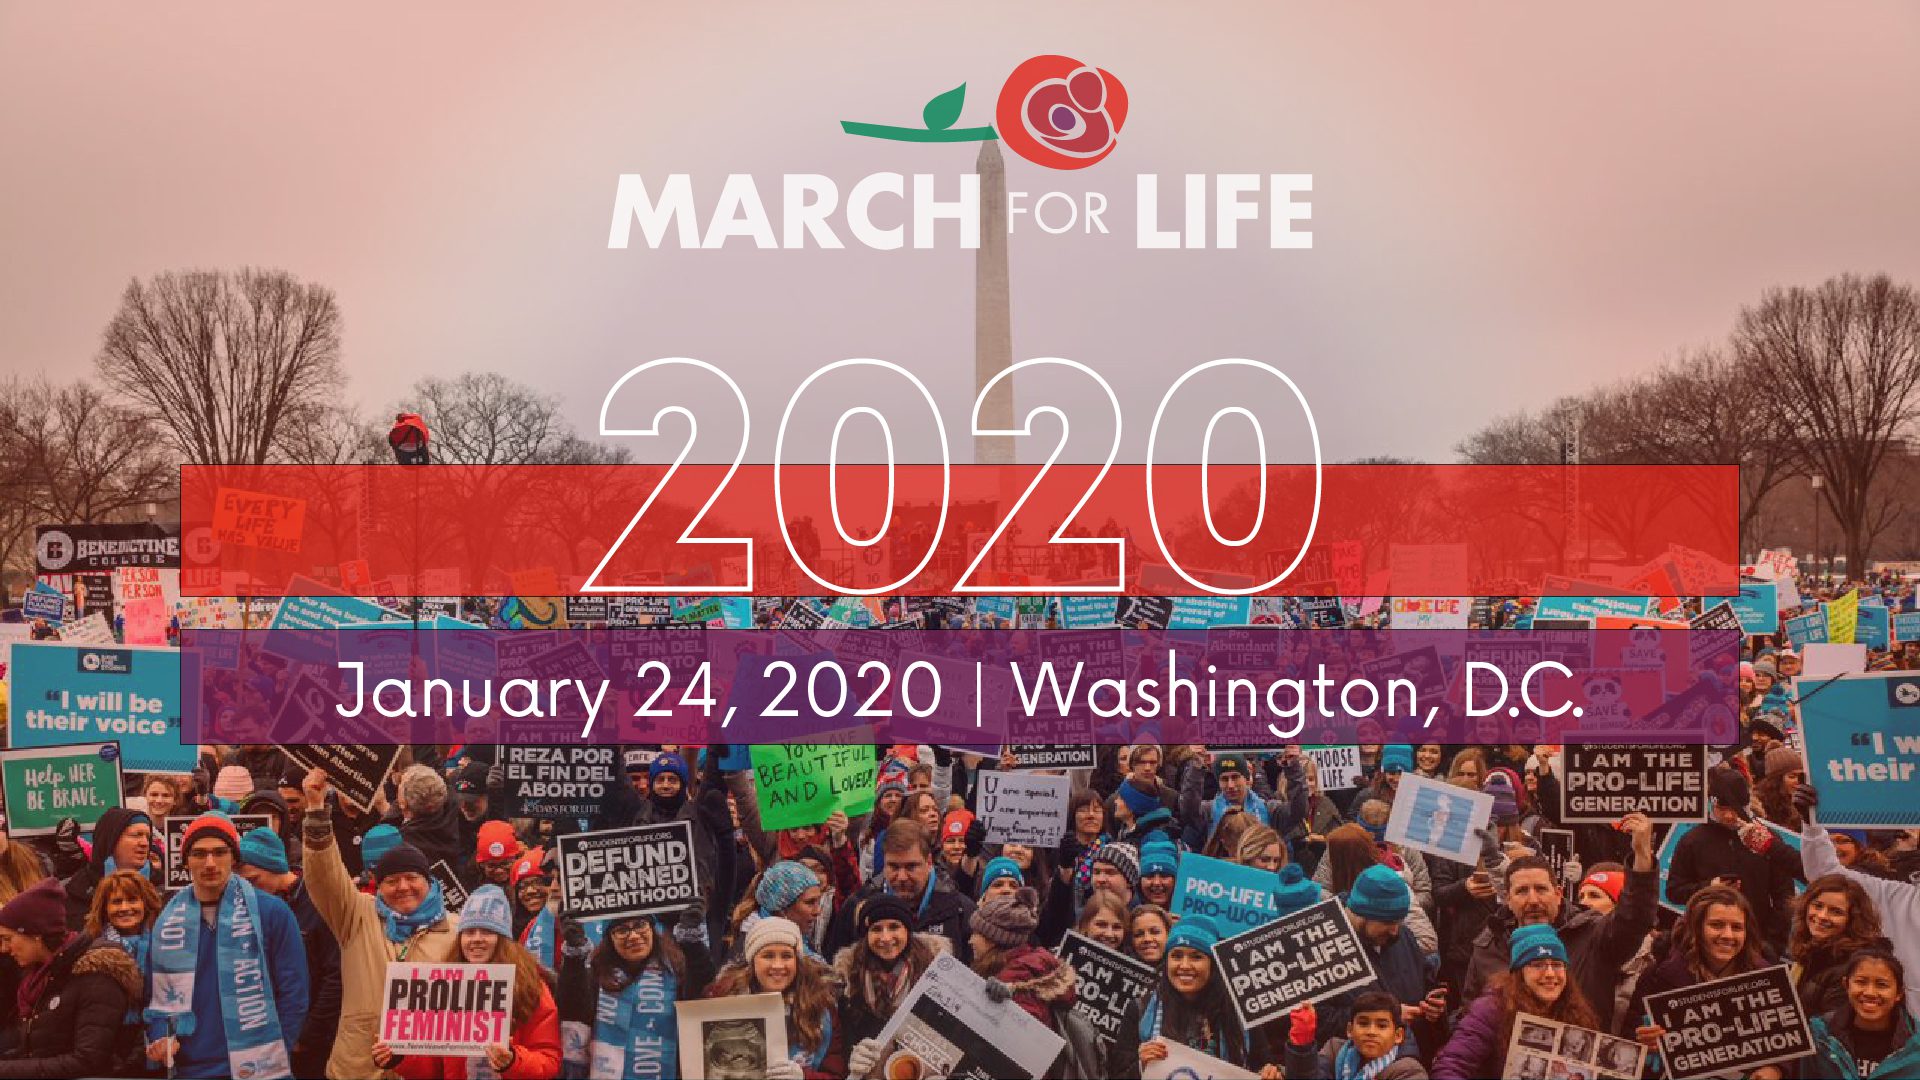 March for Life Announces Additional Speakers for the 47th Annual March